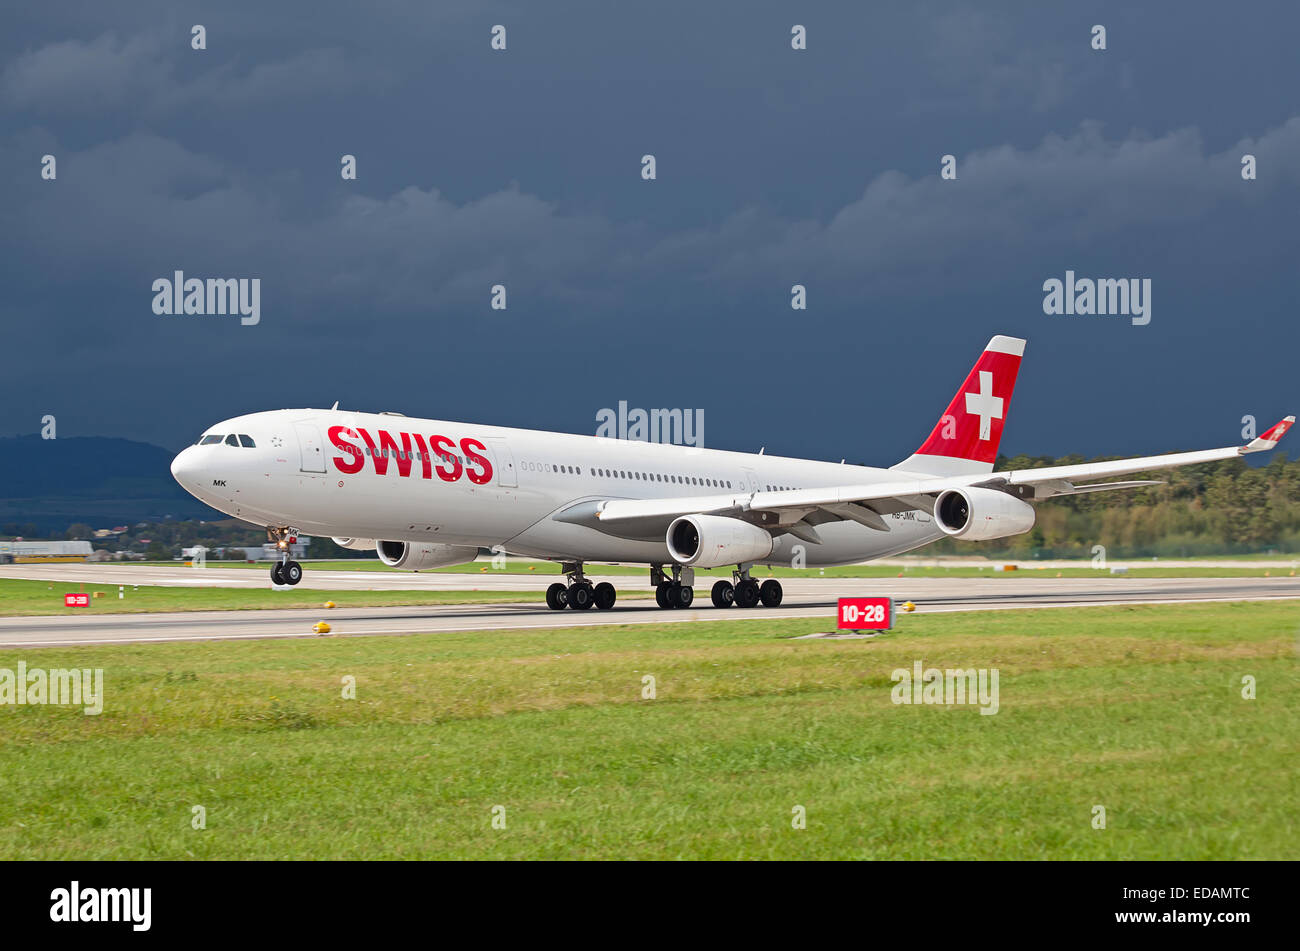 ZURICH - SEPTEMBER 21: Swiss Air A-340 taking off on September 21, 2014 in Zurich, Switzerland. Zurich airport is home port for  Stock Photo